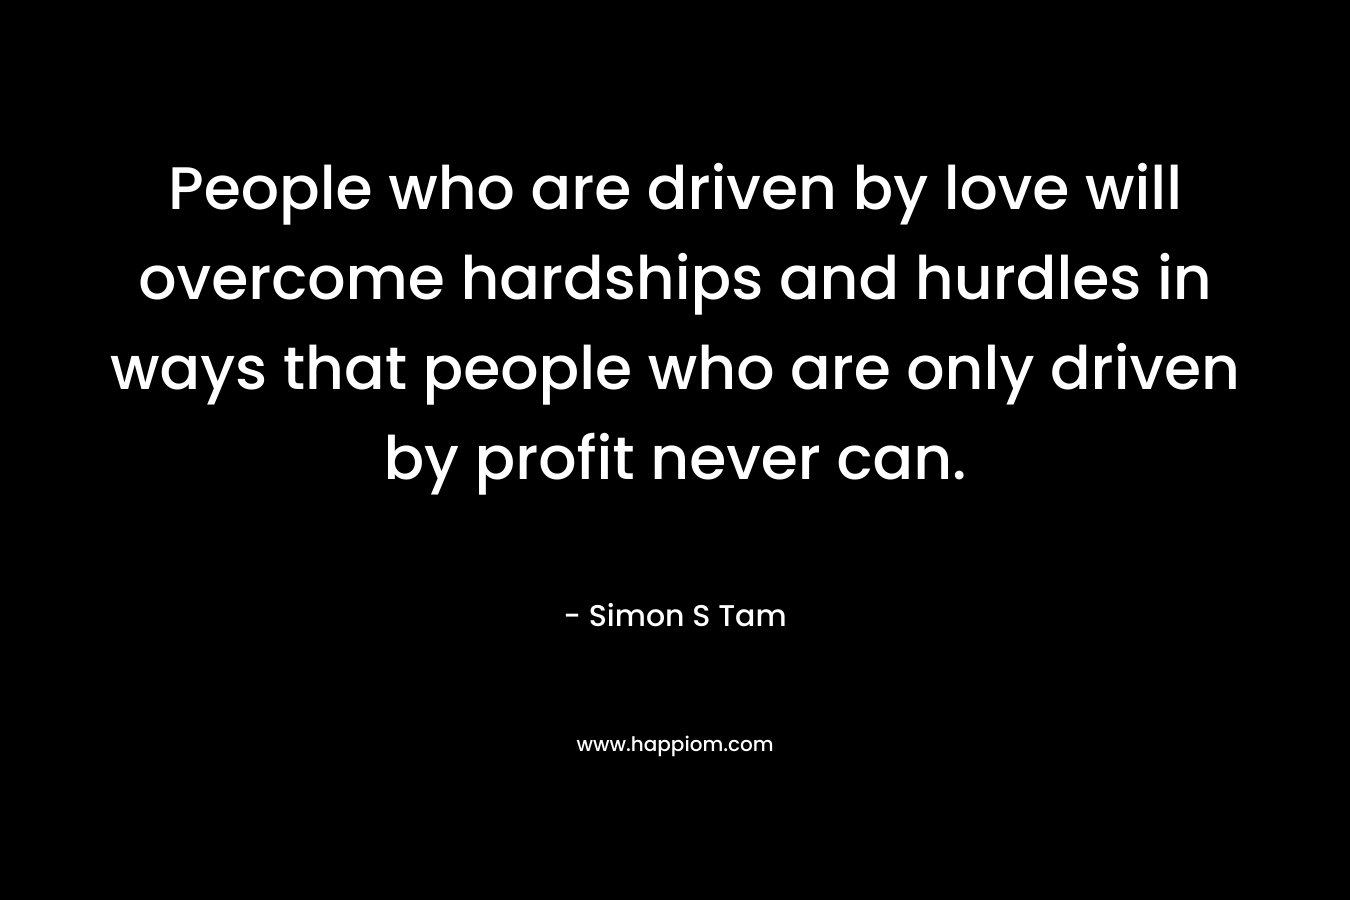 People who are driven by love will overcome hardships and hurdles in ways that people who are only driven by profit never can.